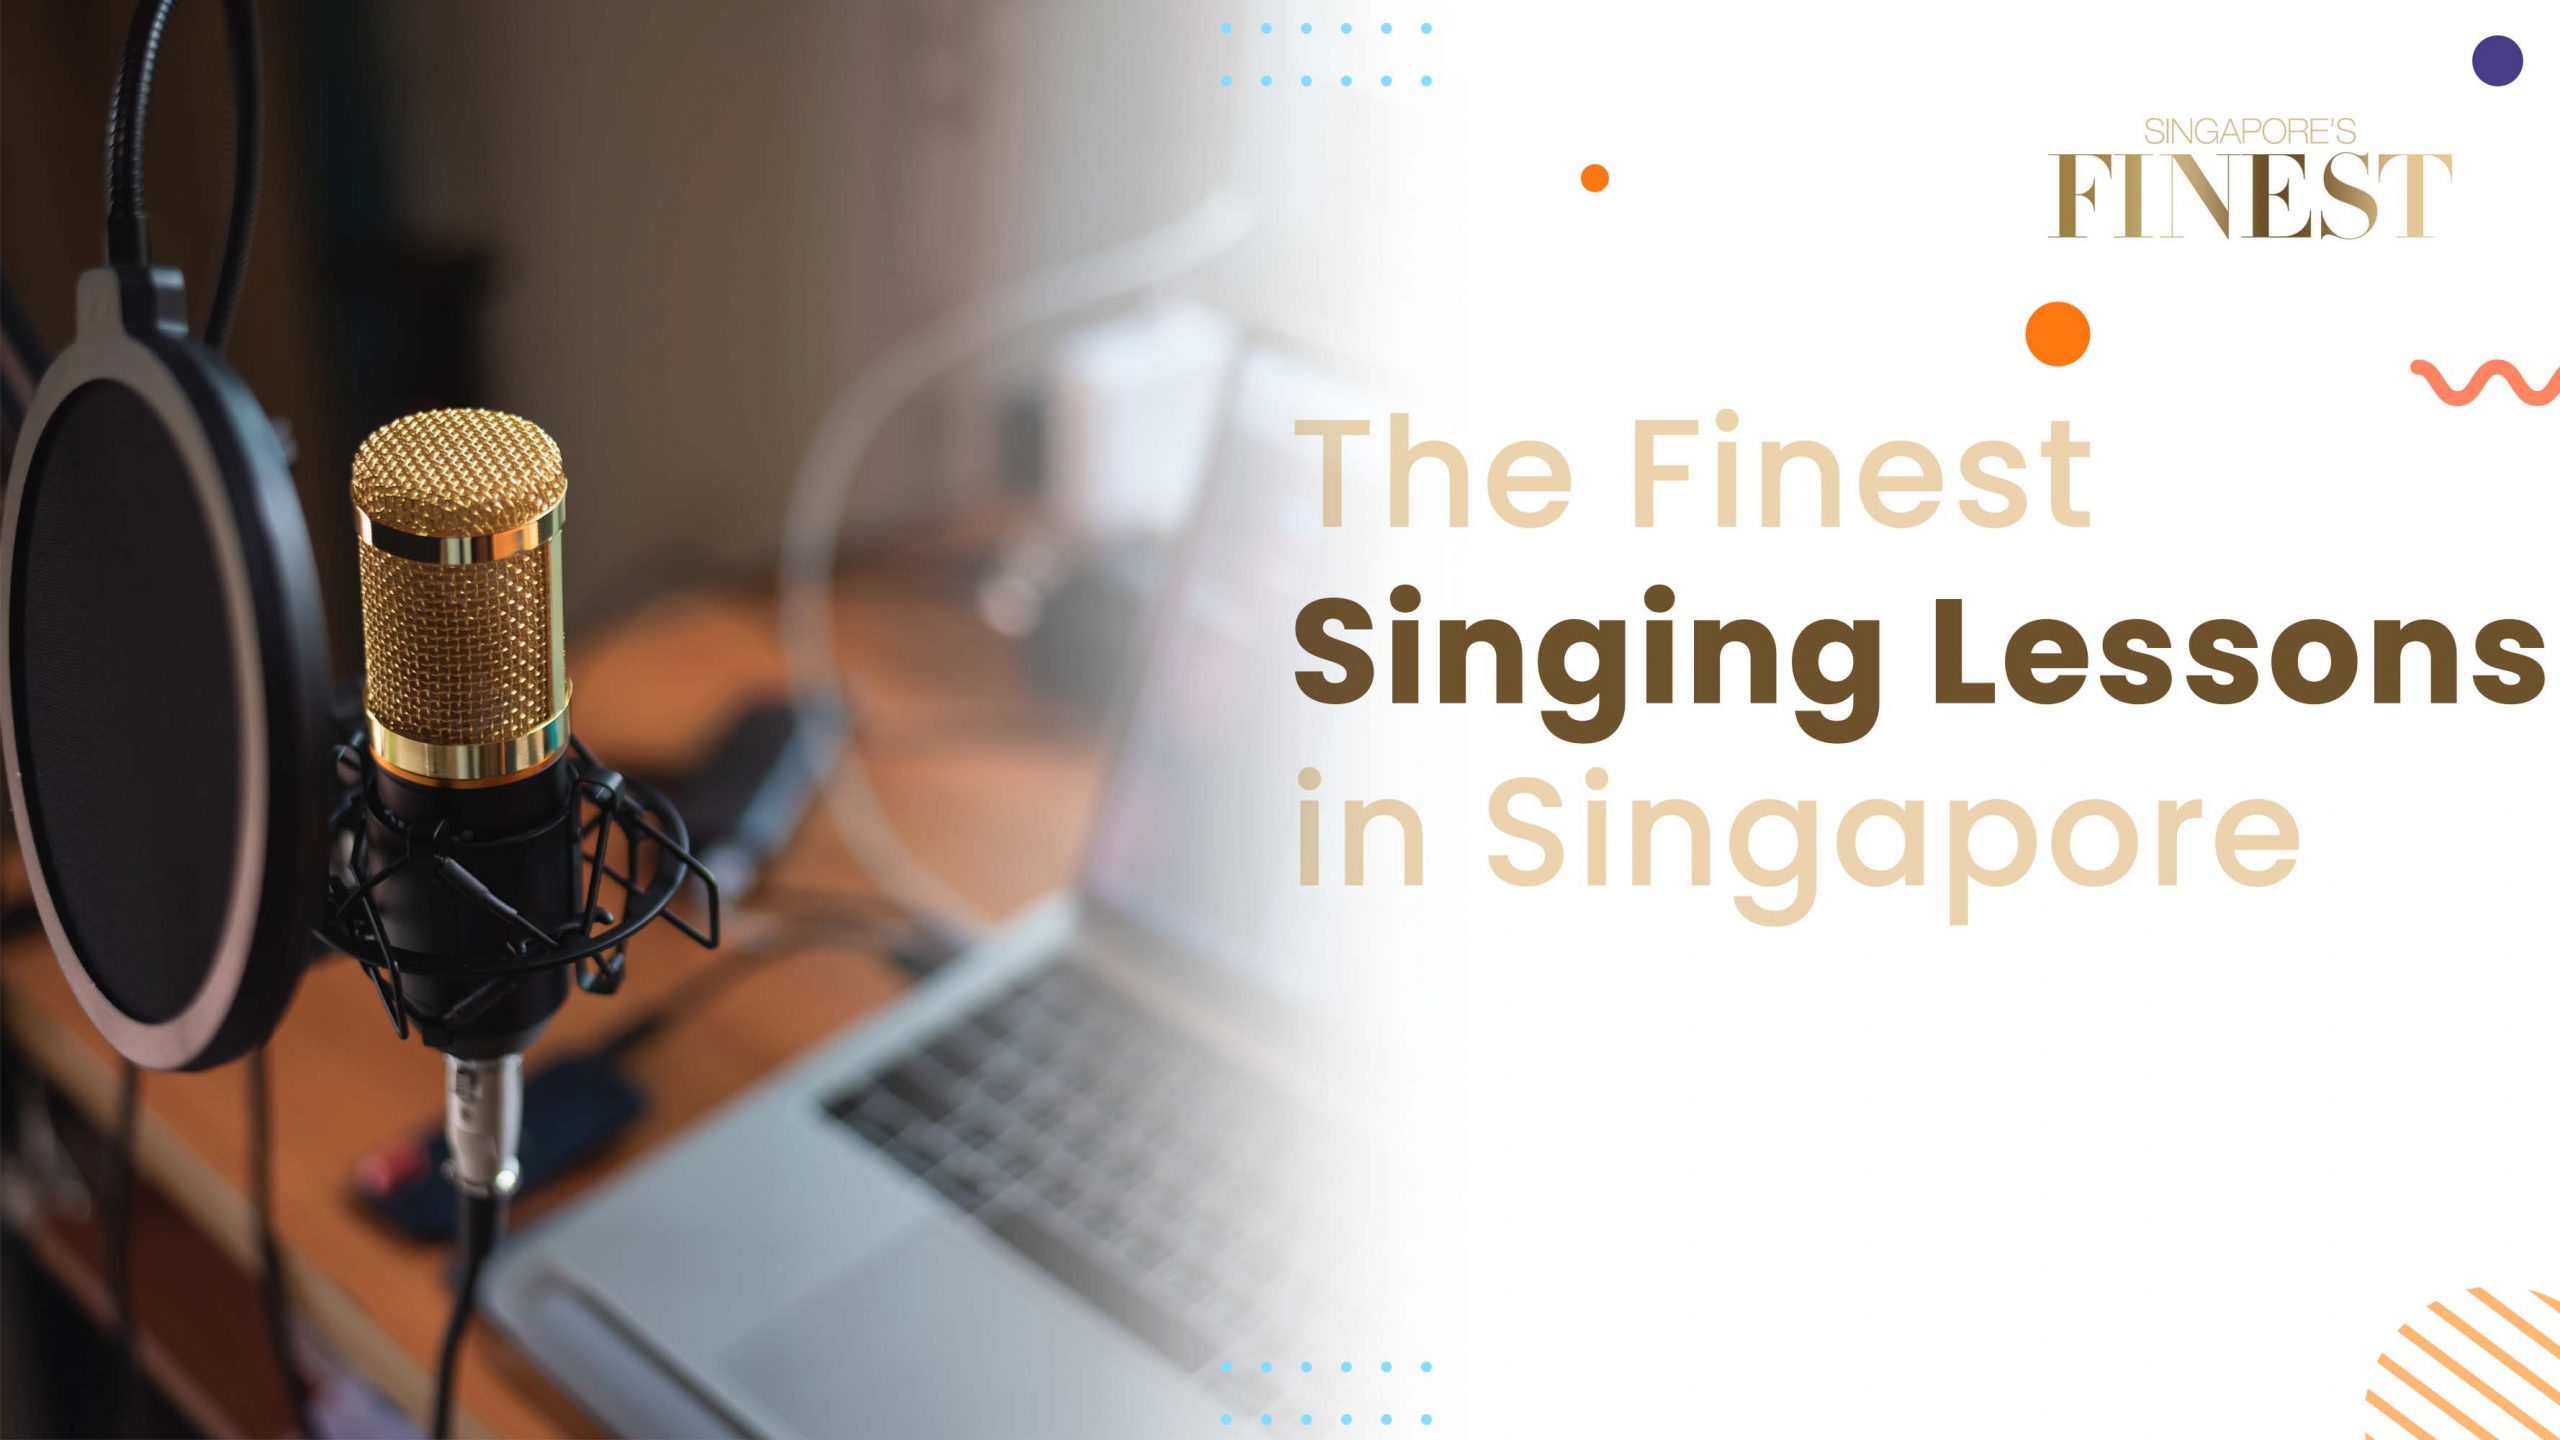 The Finest Singing Lessons in Singapore